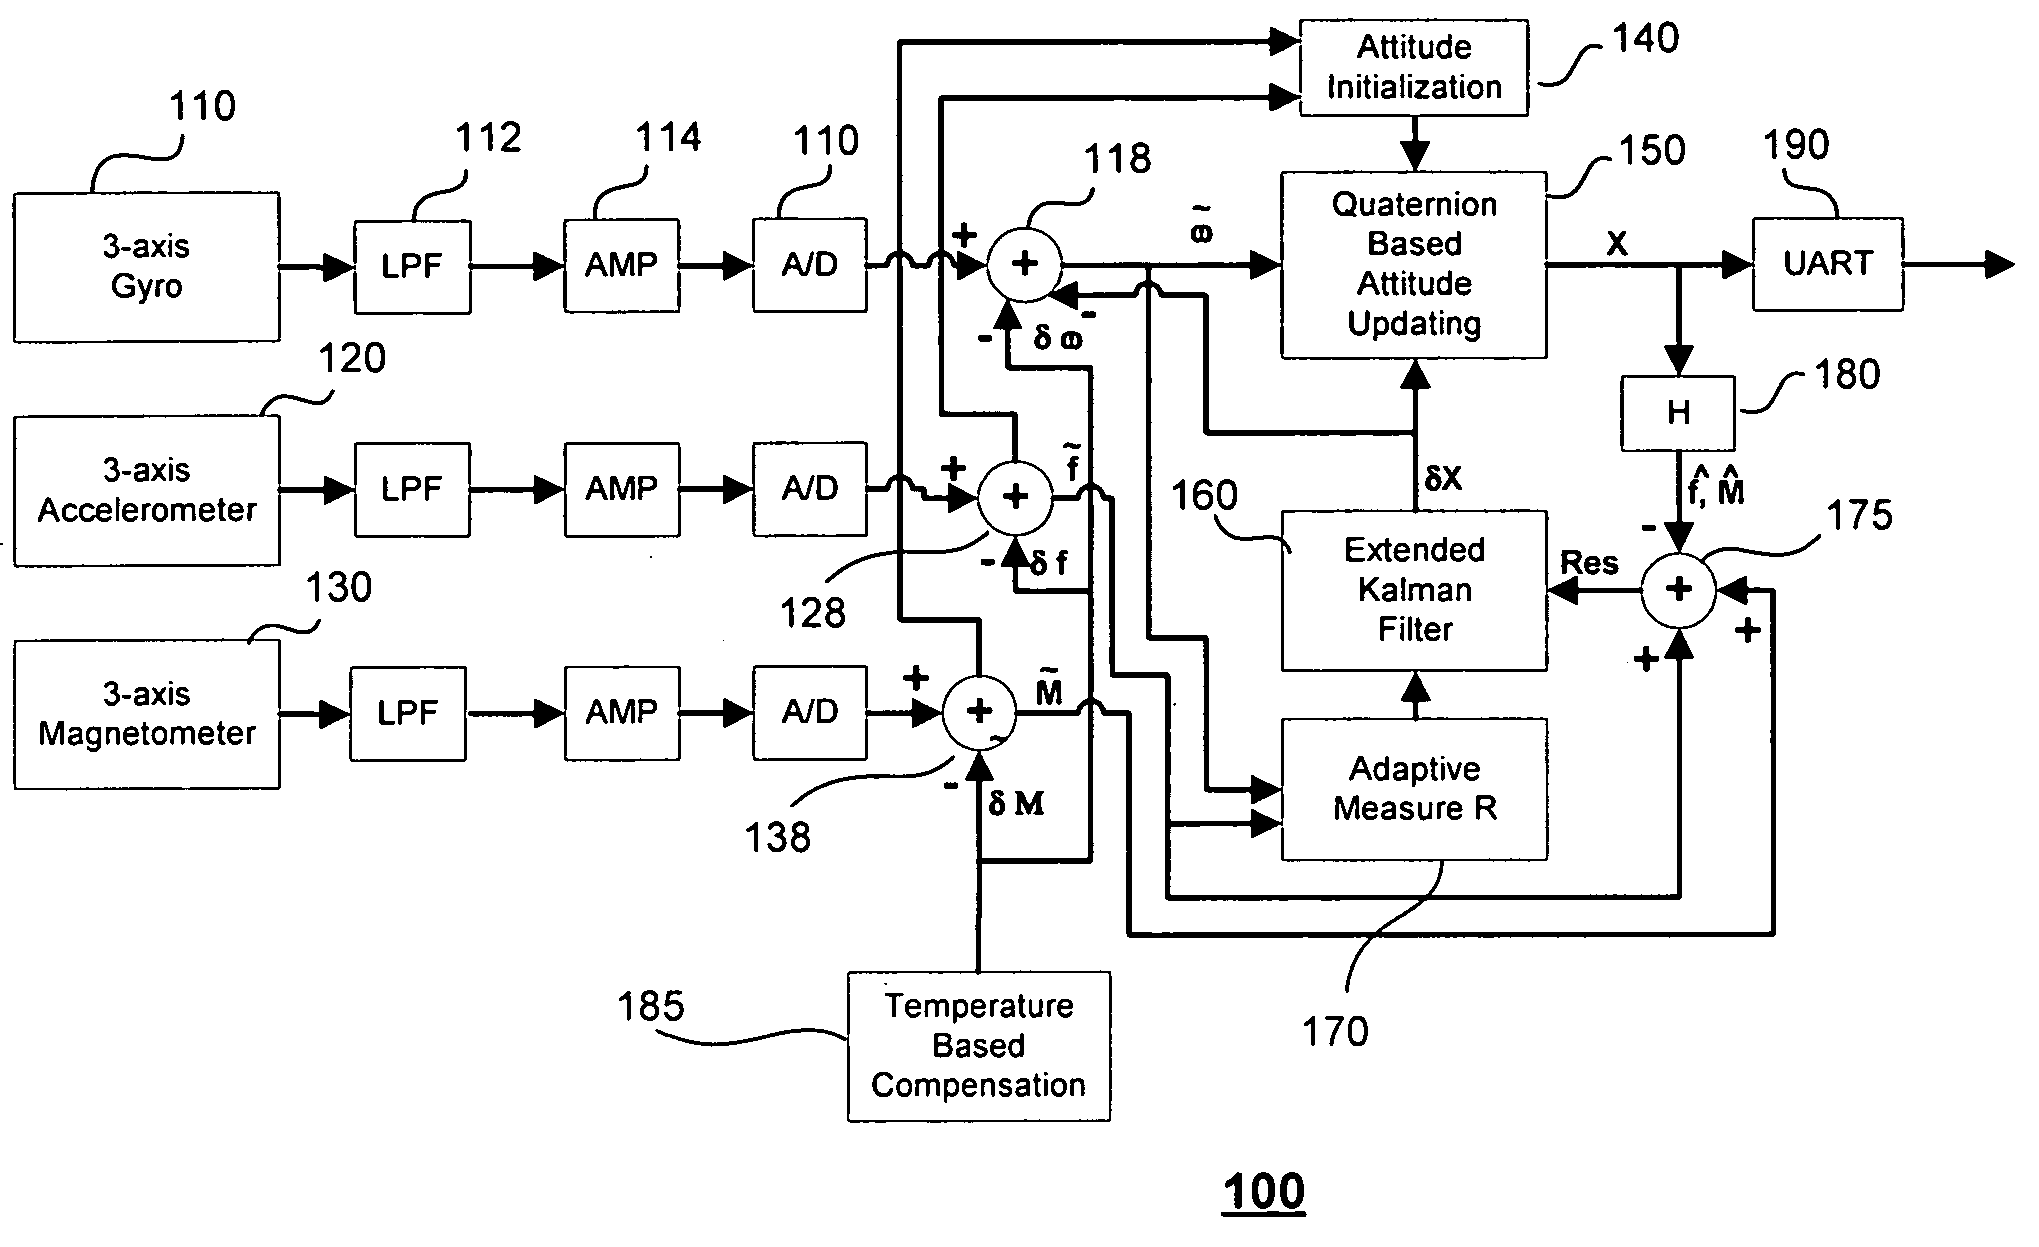 Method and apparatus for adaptive filter based attitude updating